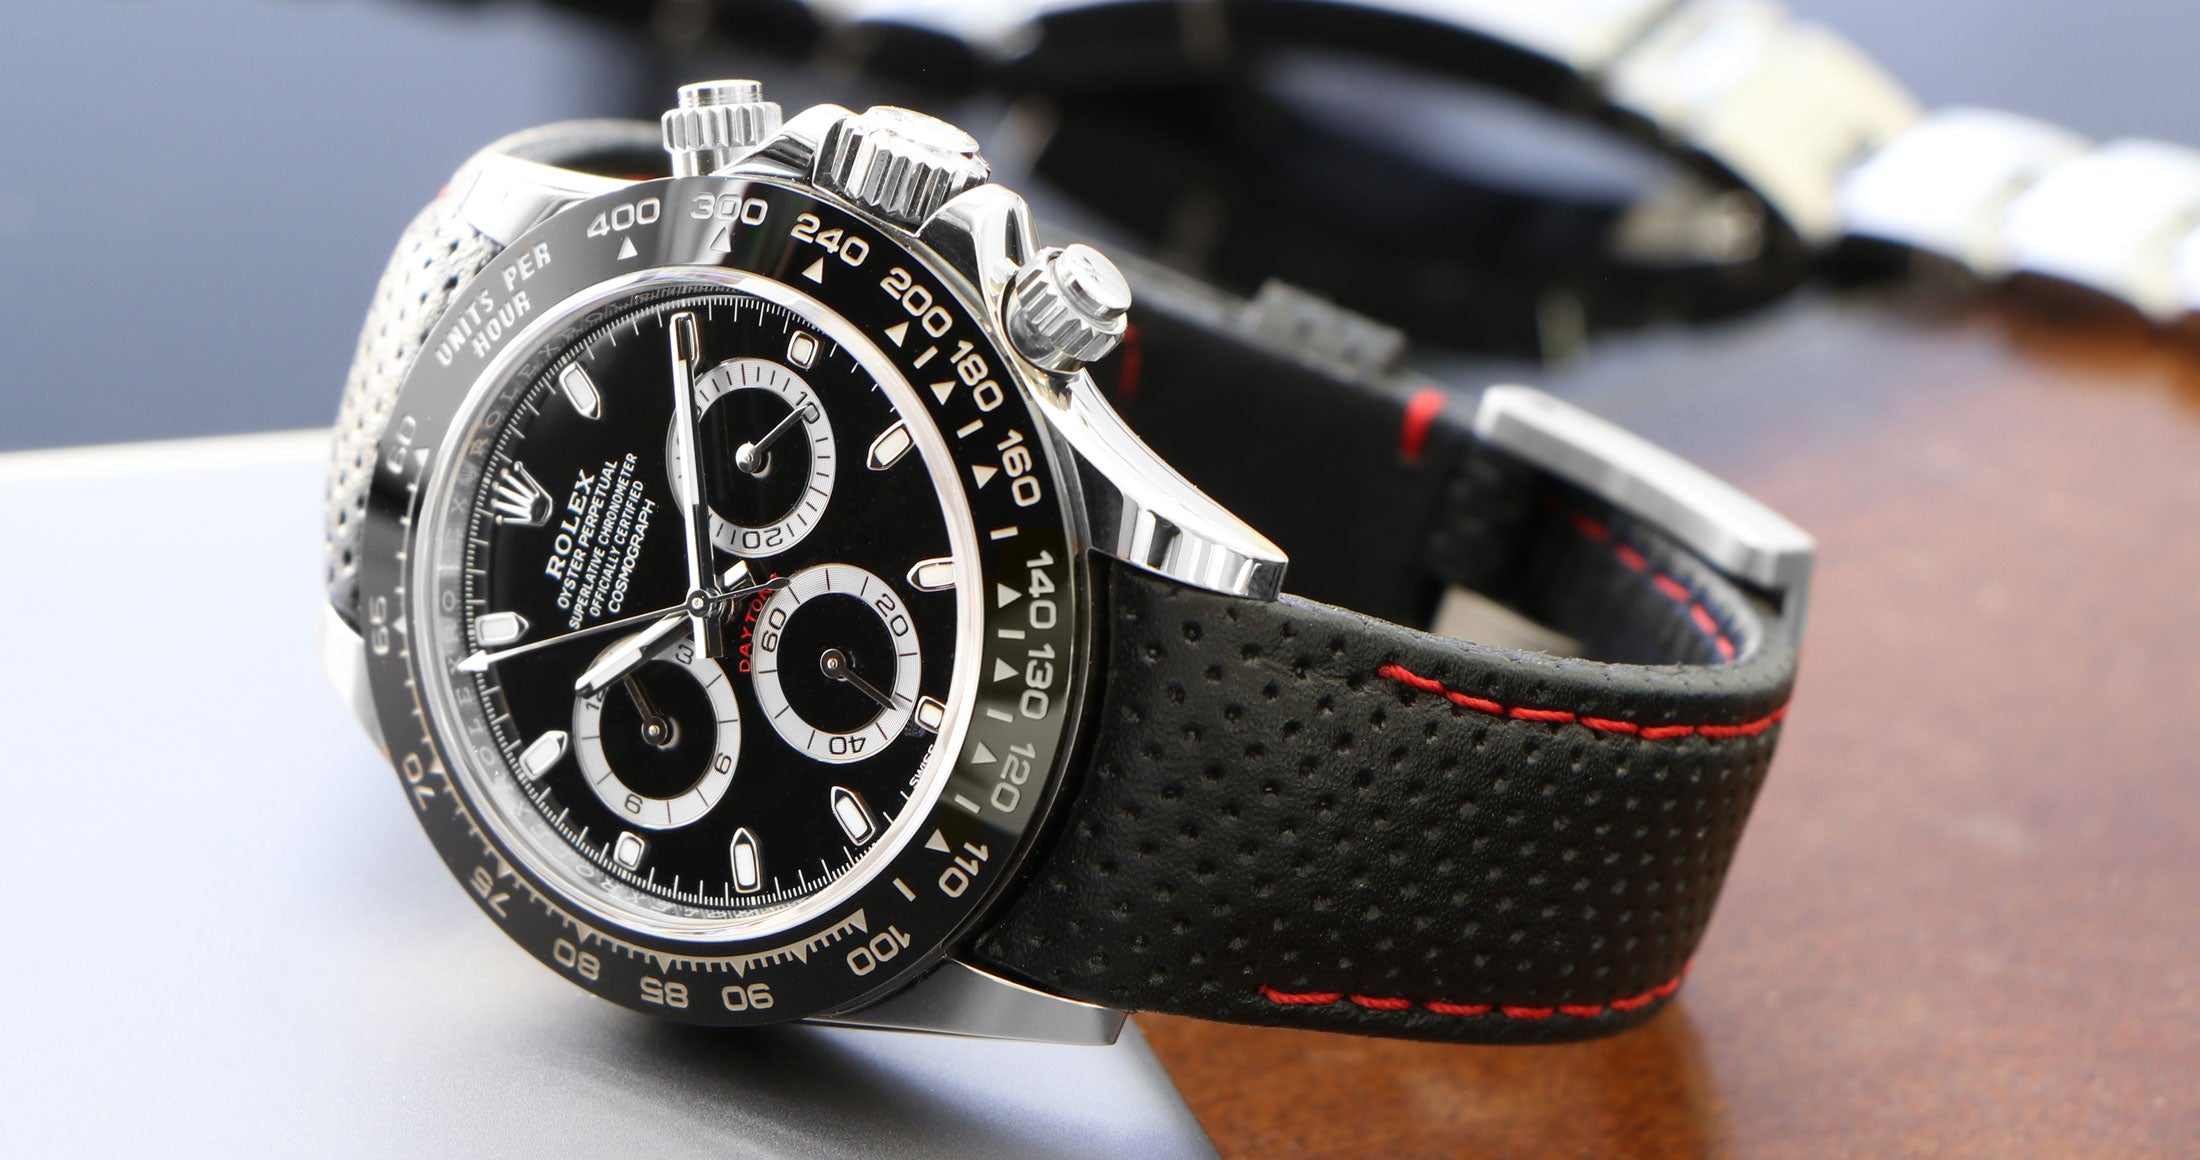 Perforated Leather Strap on Rolex Daytona - Black with Red Stitching